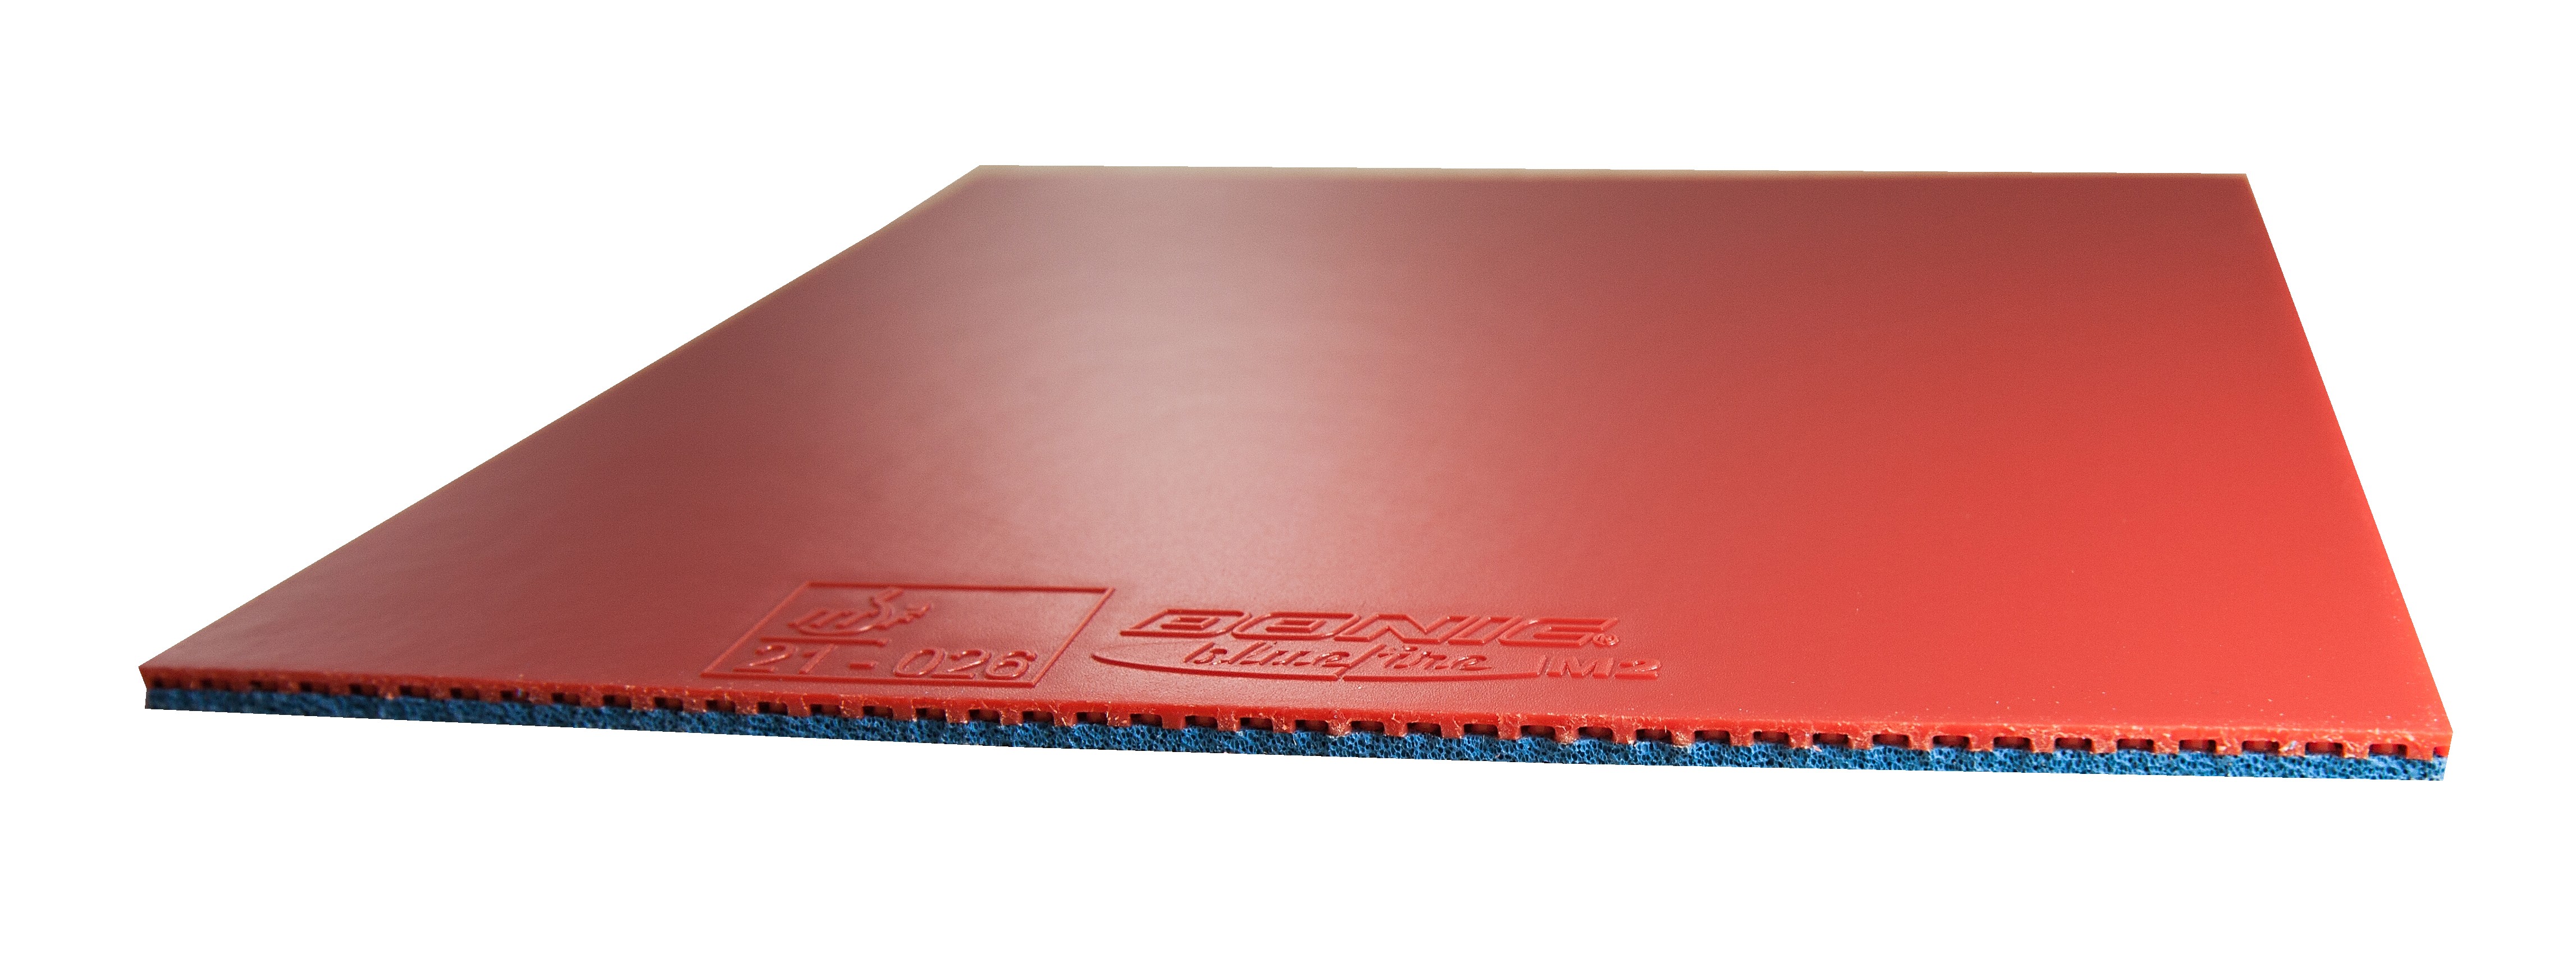 Donic Bluefire M2 Table Tennis Rubber Sale 